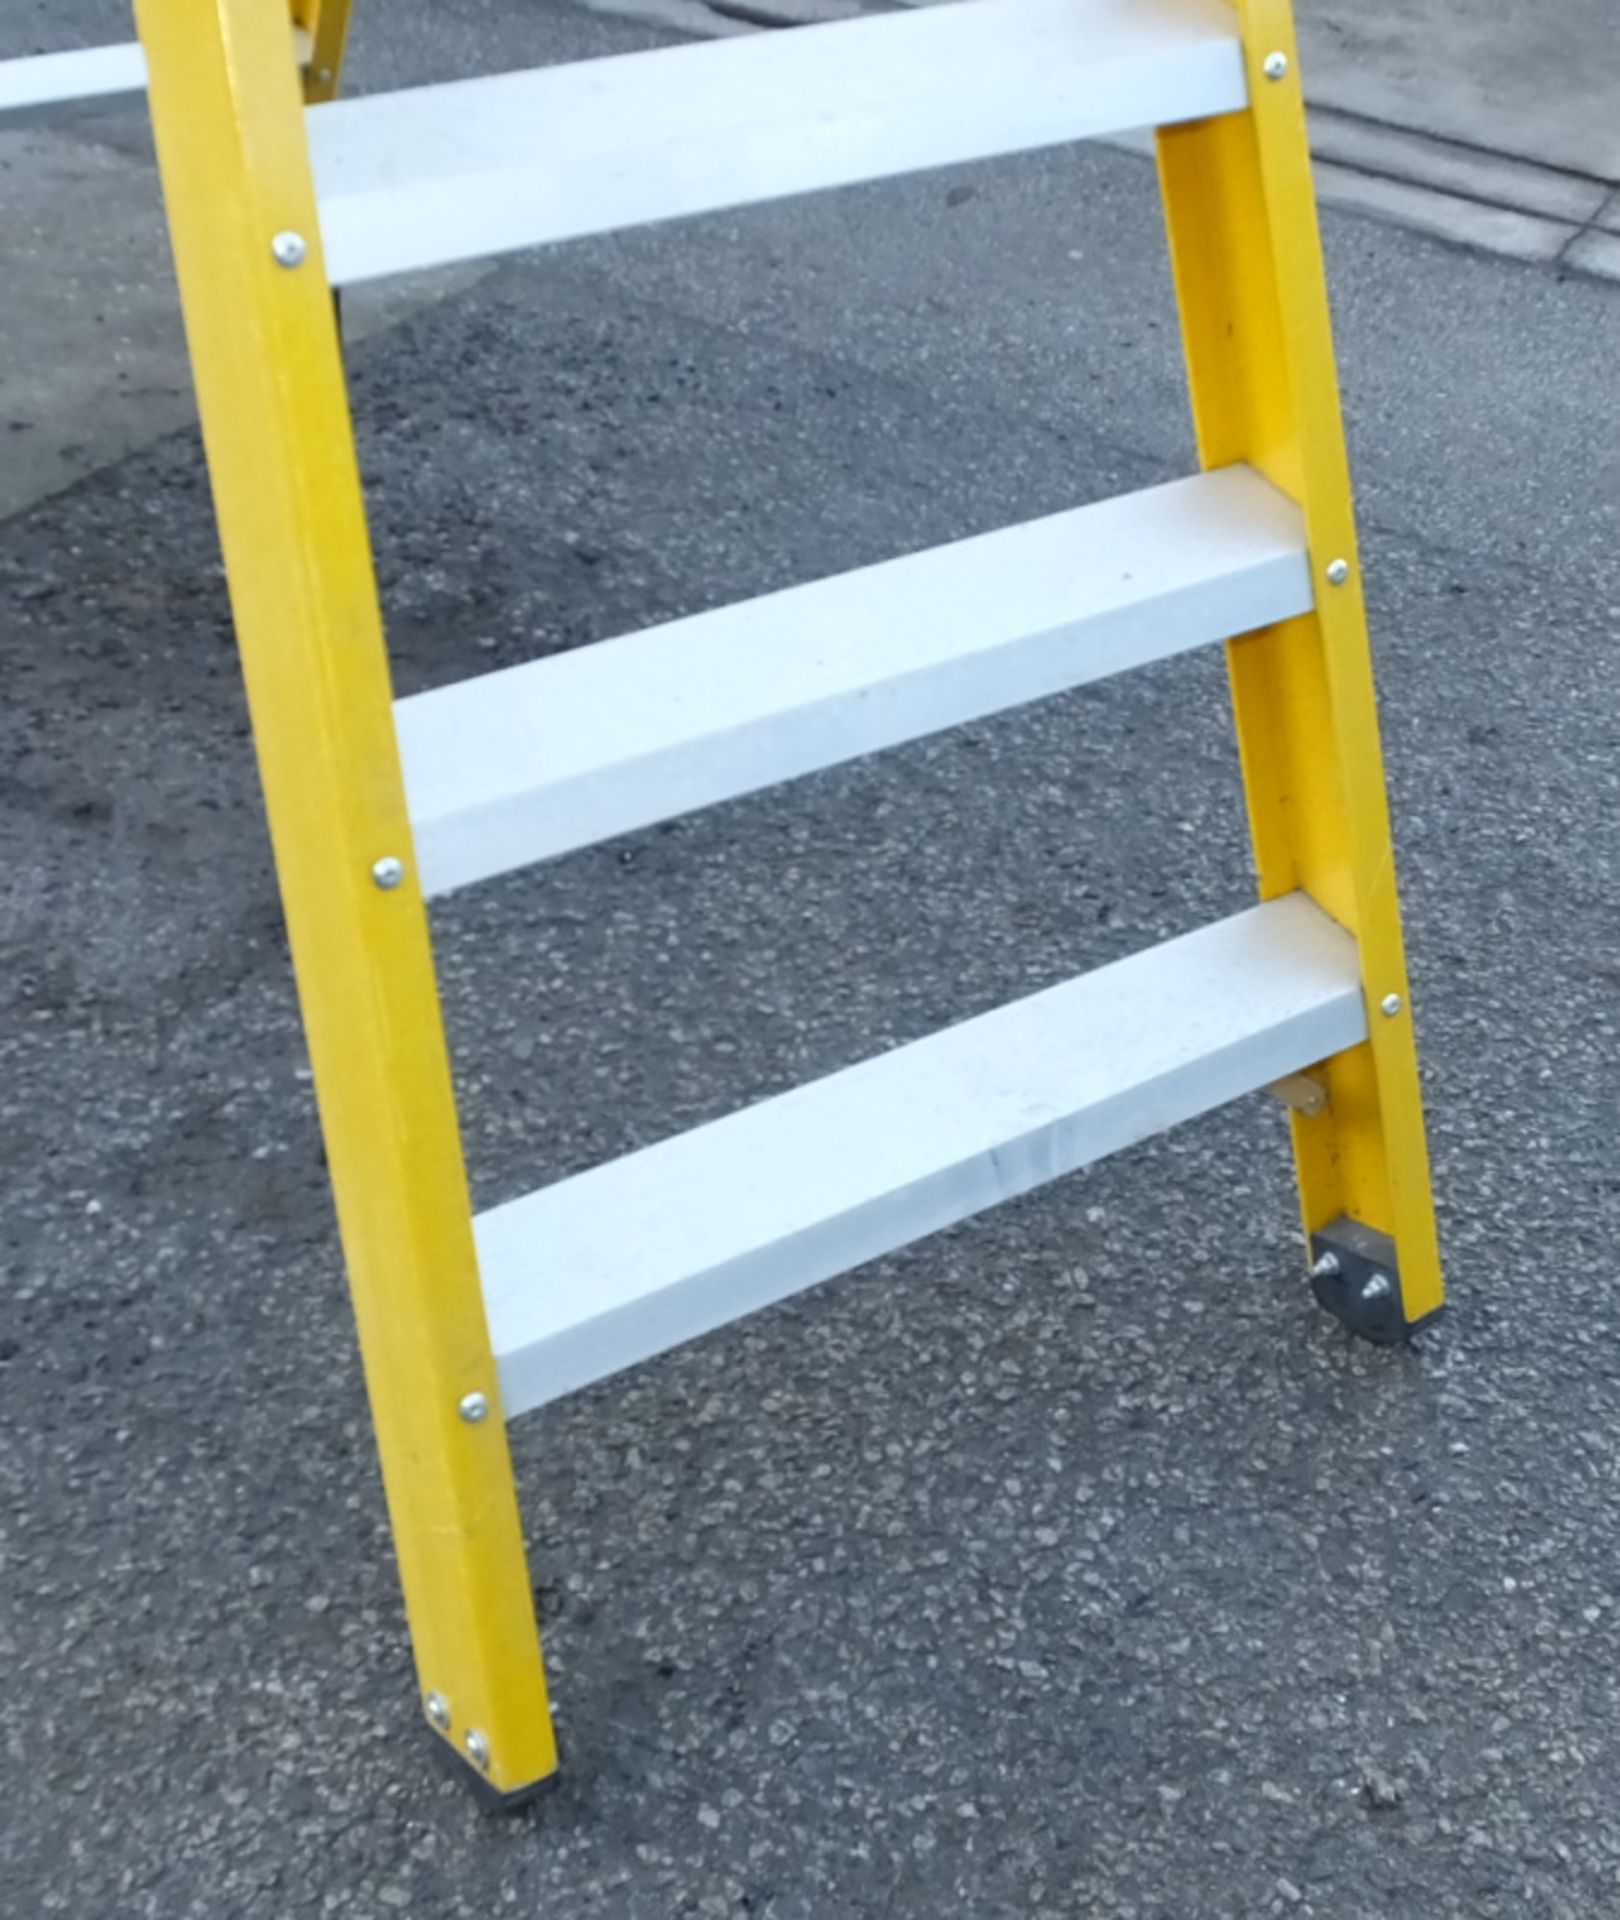 Bratts Ladders 5 Prong Step Ladder - Image 5 of 5